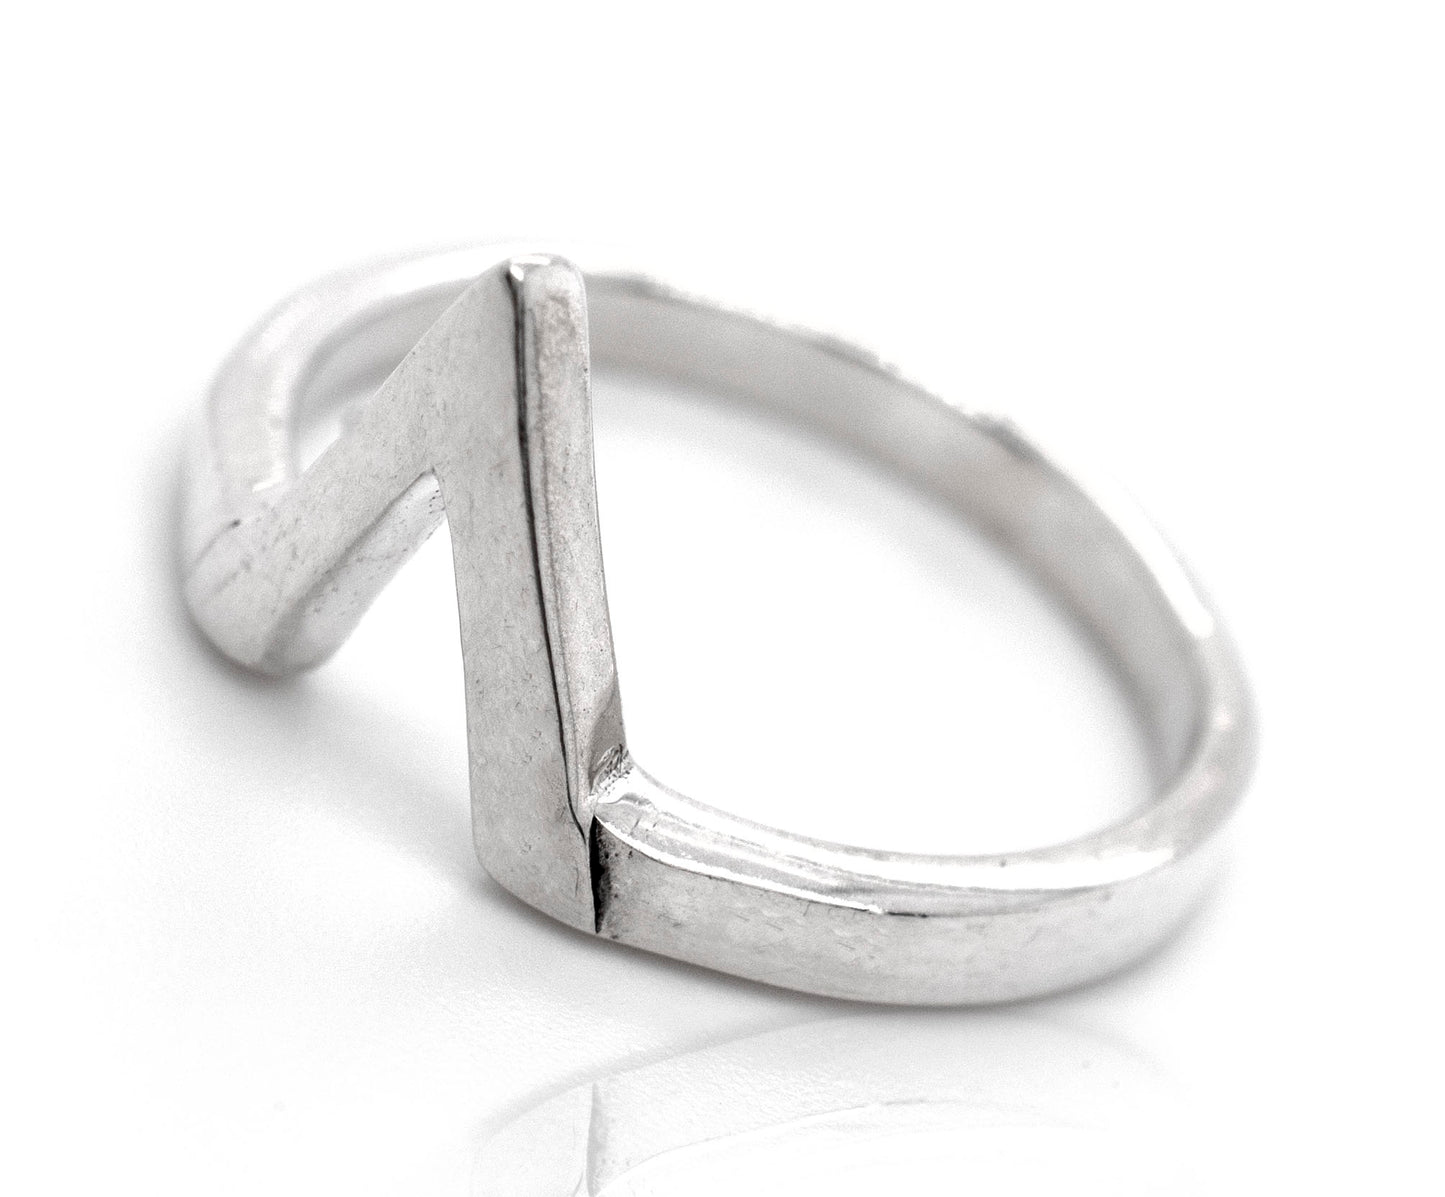 A sterling silver ring with a Simple "V" Shape Ring design.